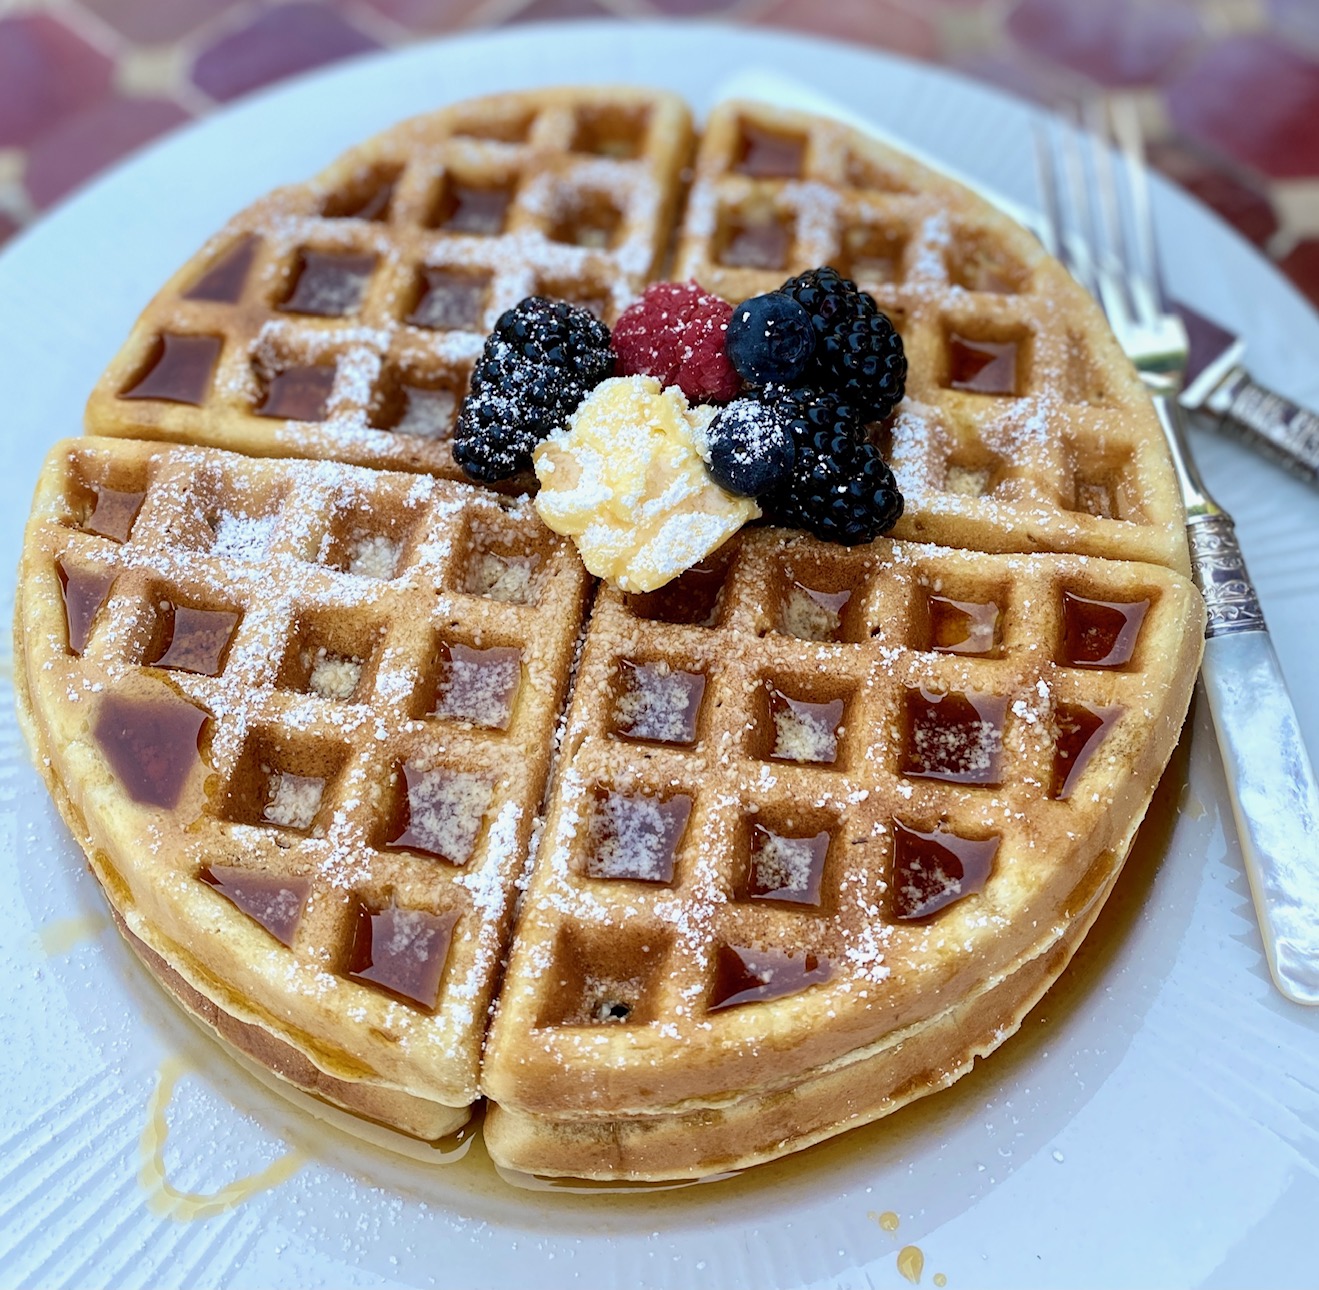 Easy Homemade Belgian Waffles From Scratch The Art Of Food And Wine